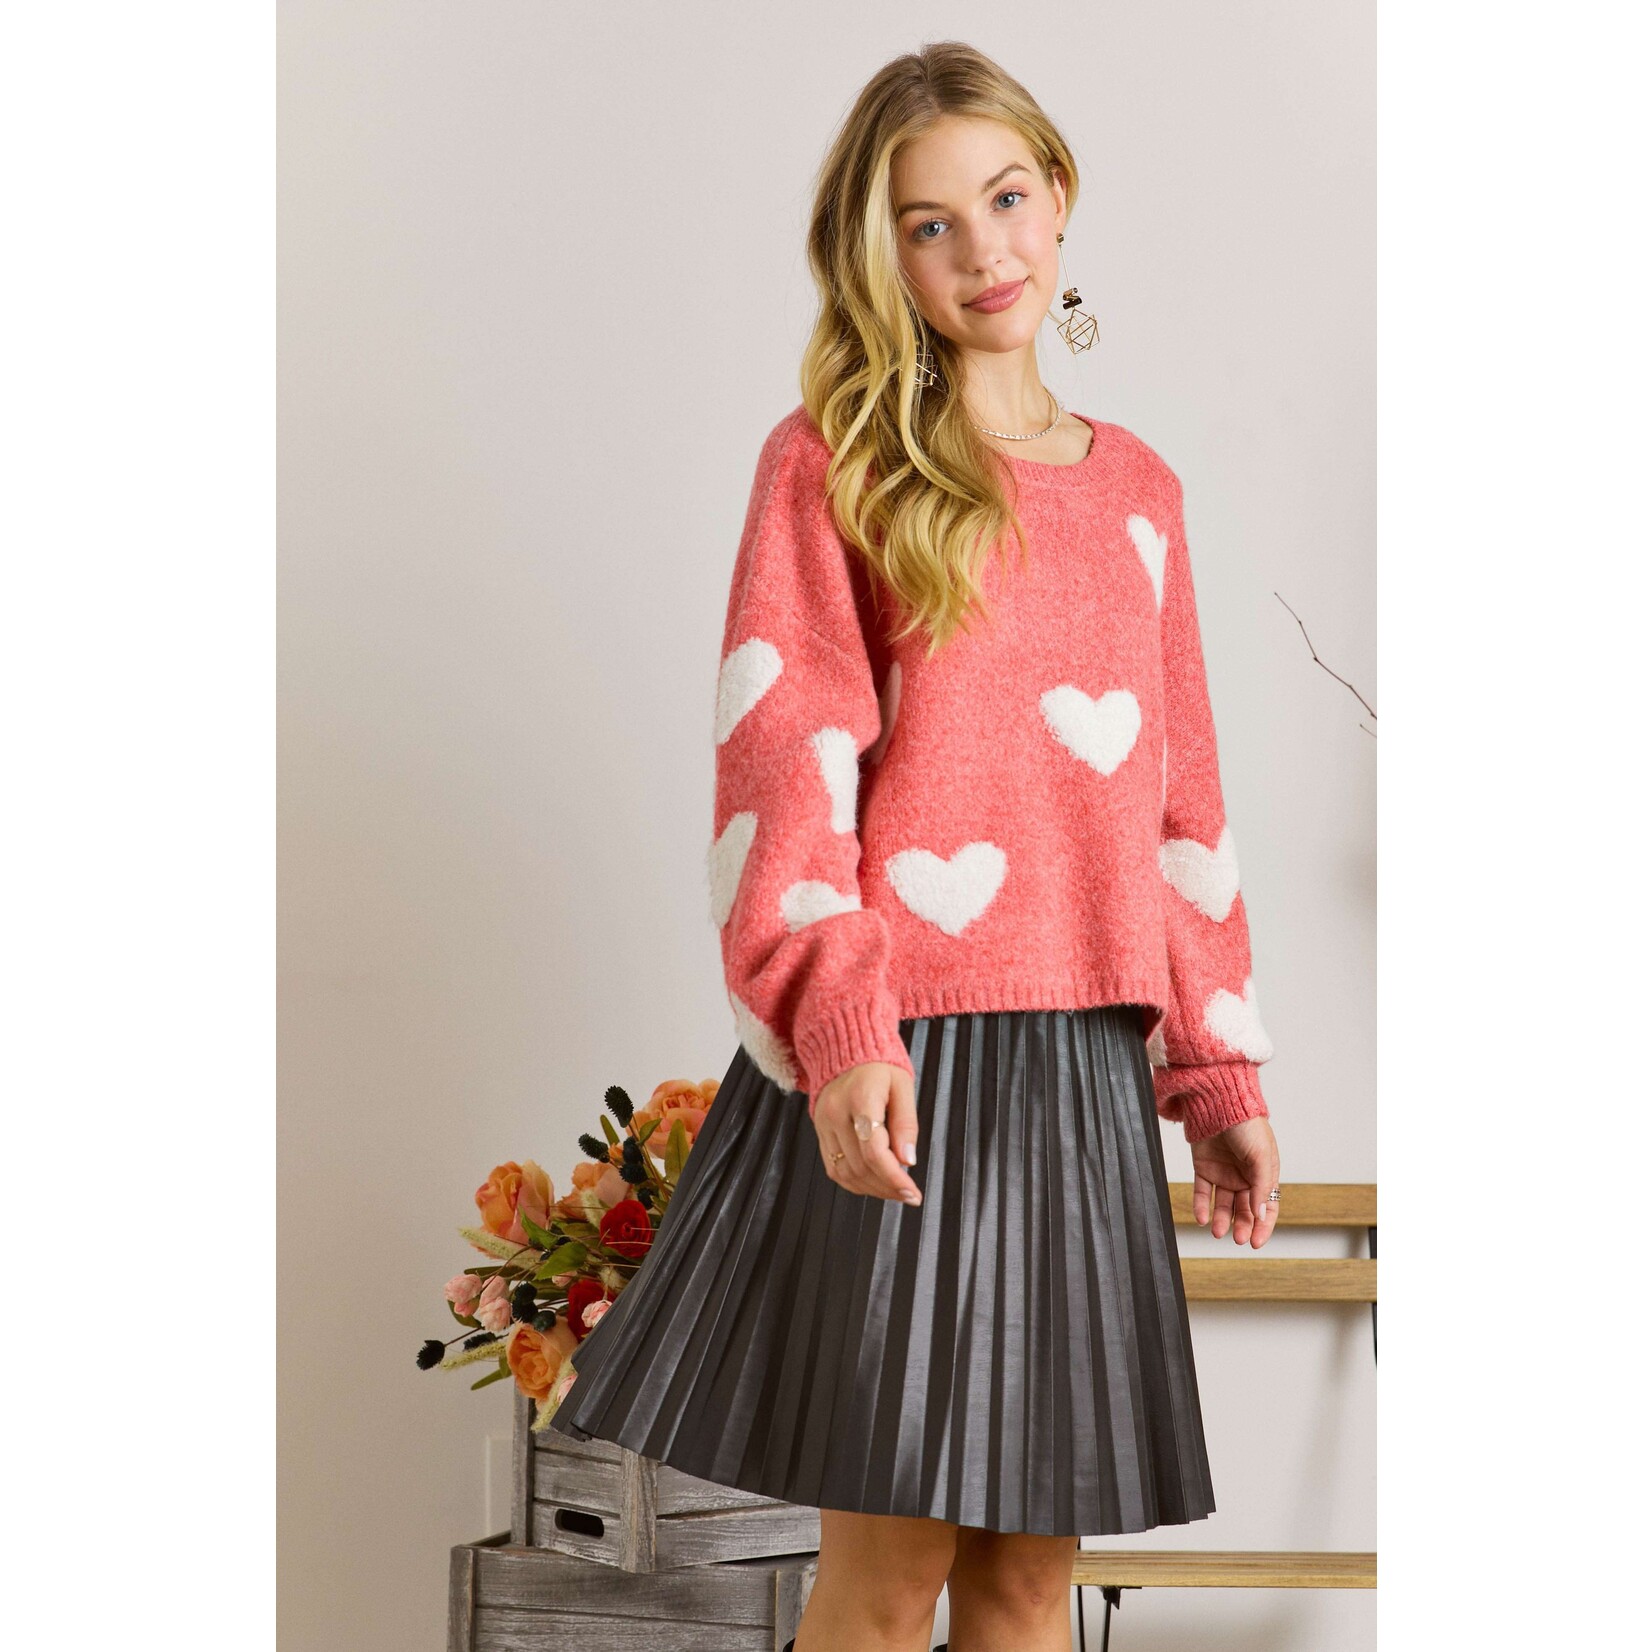 Adora Plus Size Lovely Heart Sweater